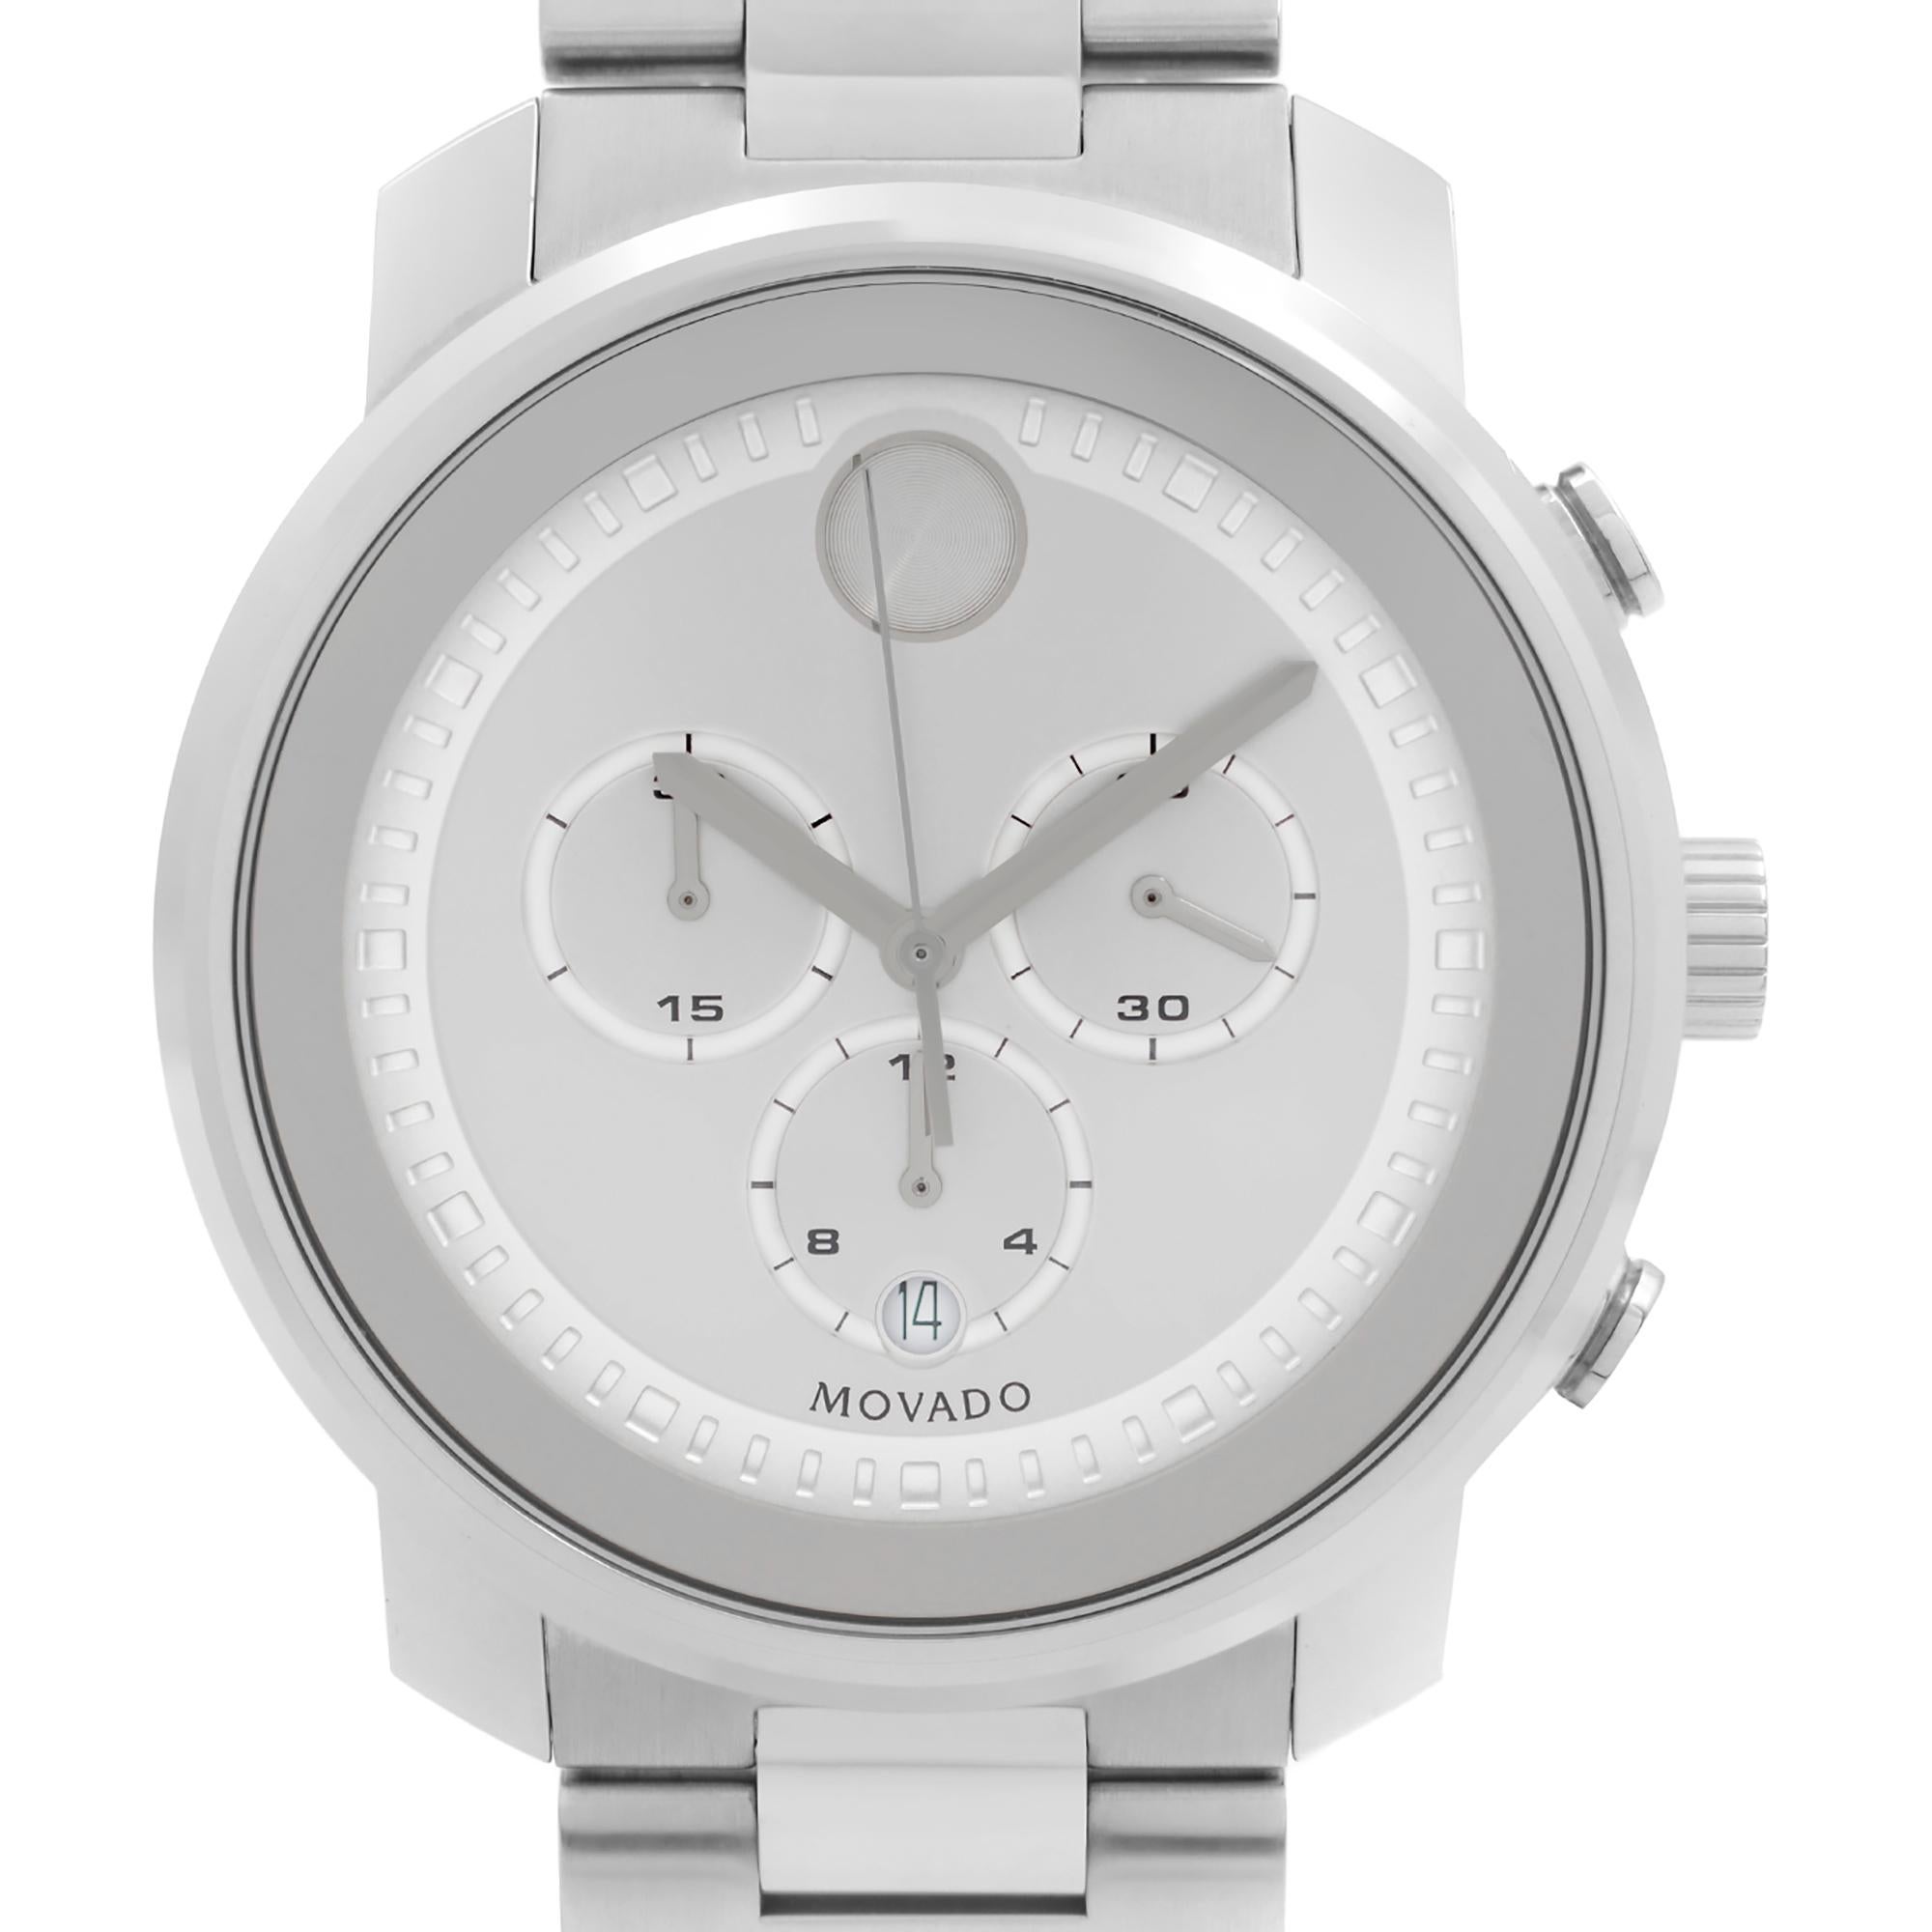 Store Display Model Movado Bold Chronograph Stainless Steel Silver Dial Quartz Men's Watch 3600276. The Watch Has Minor Blemishes on the Caseback. This Beautiful Timepiece is Powered by Quartz (Battery) Movement And Features: Round Stainless Steel